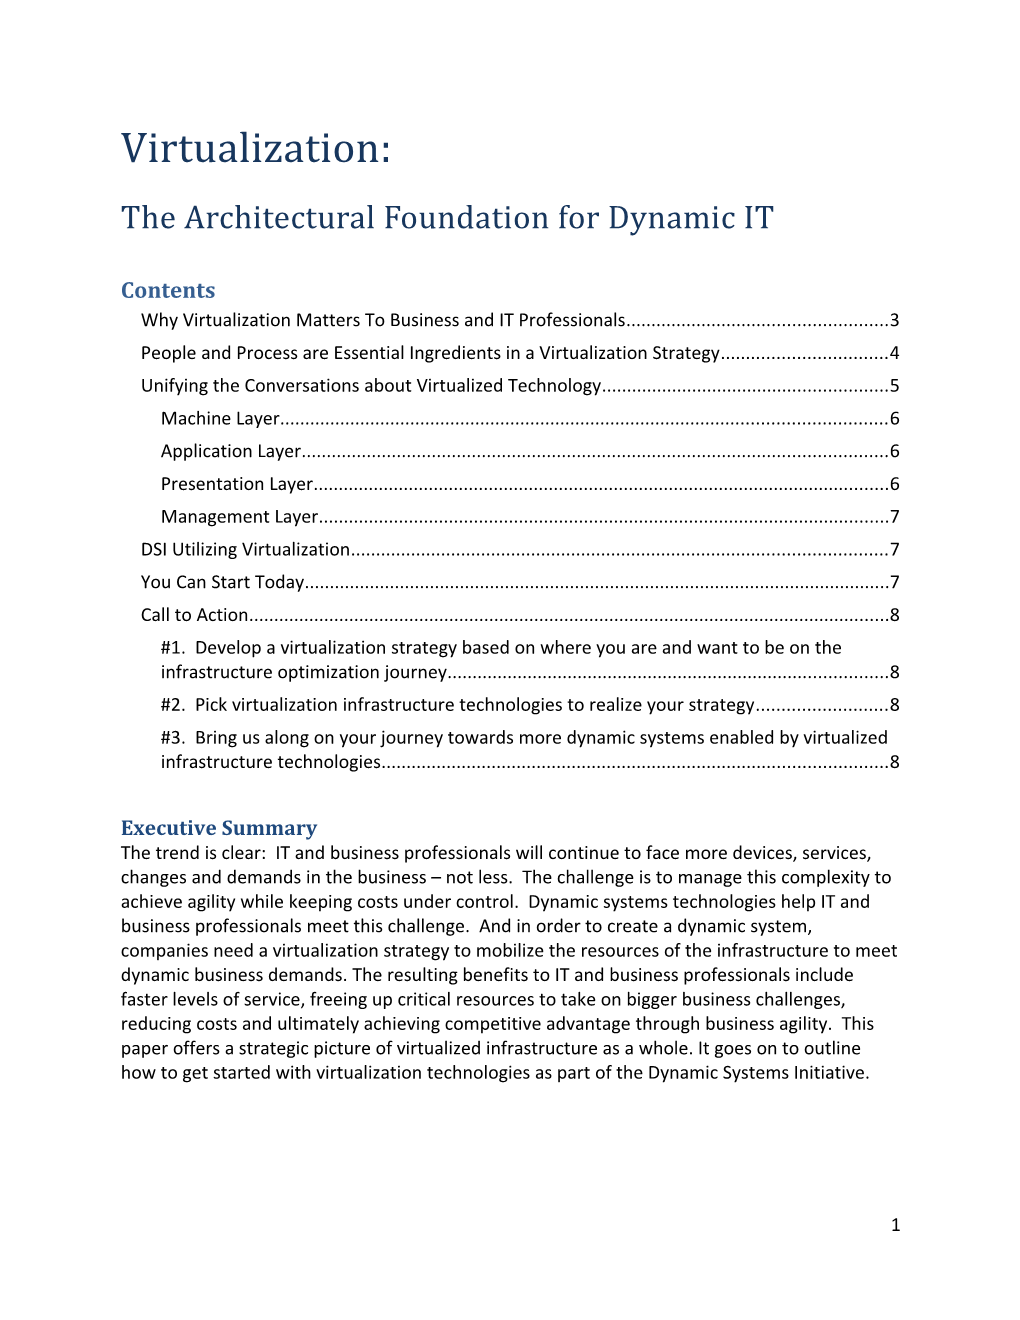 The Architectural Foundation for Dynamic IT